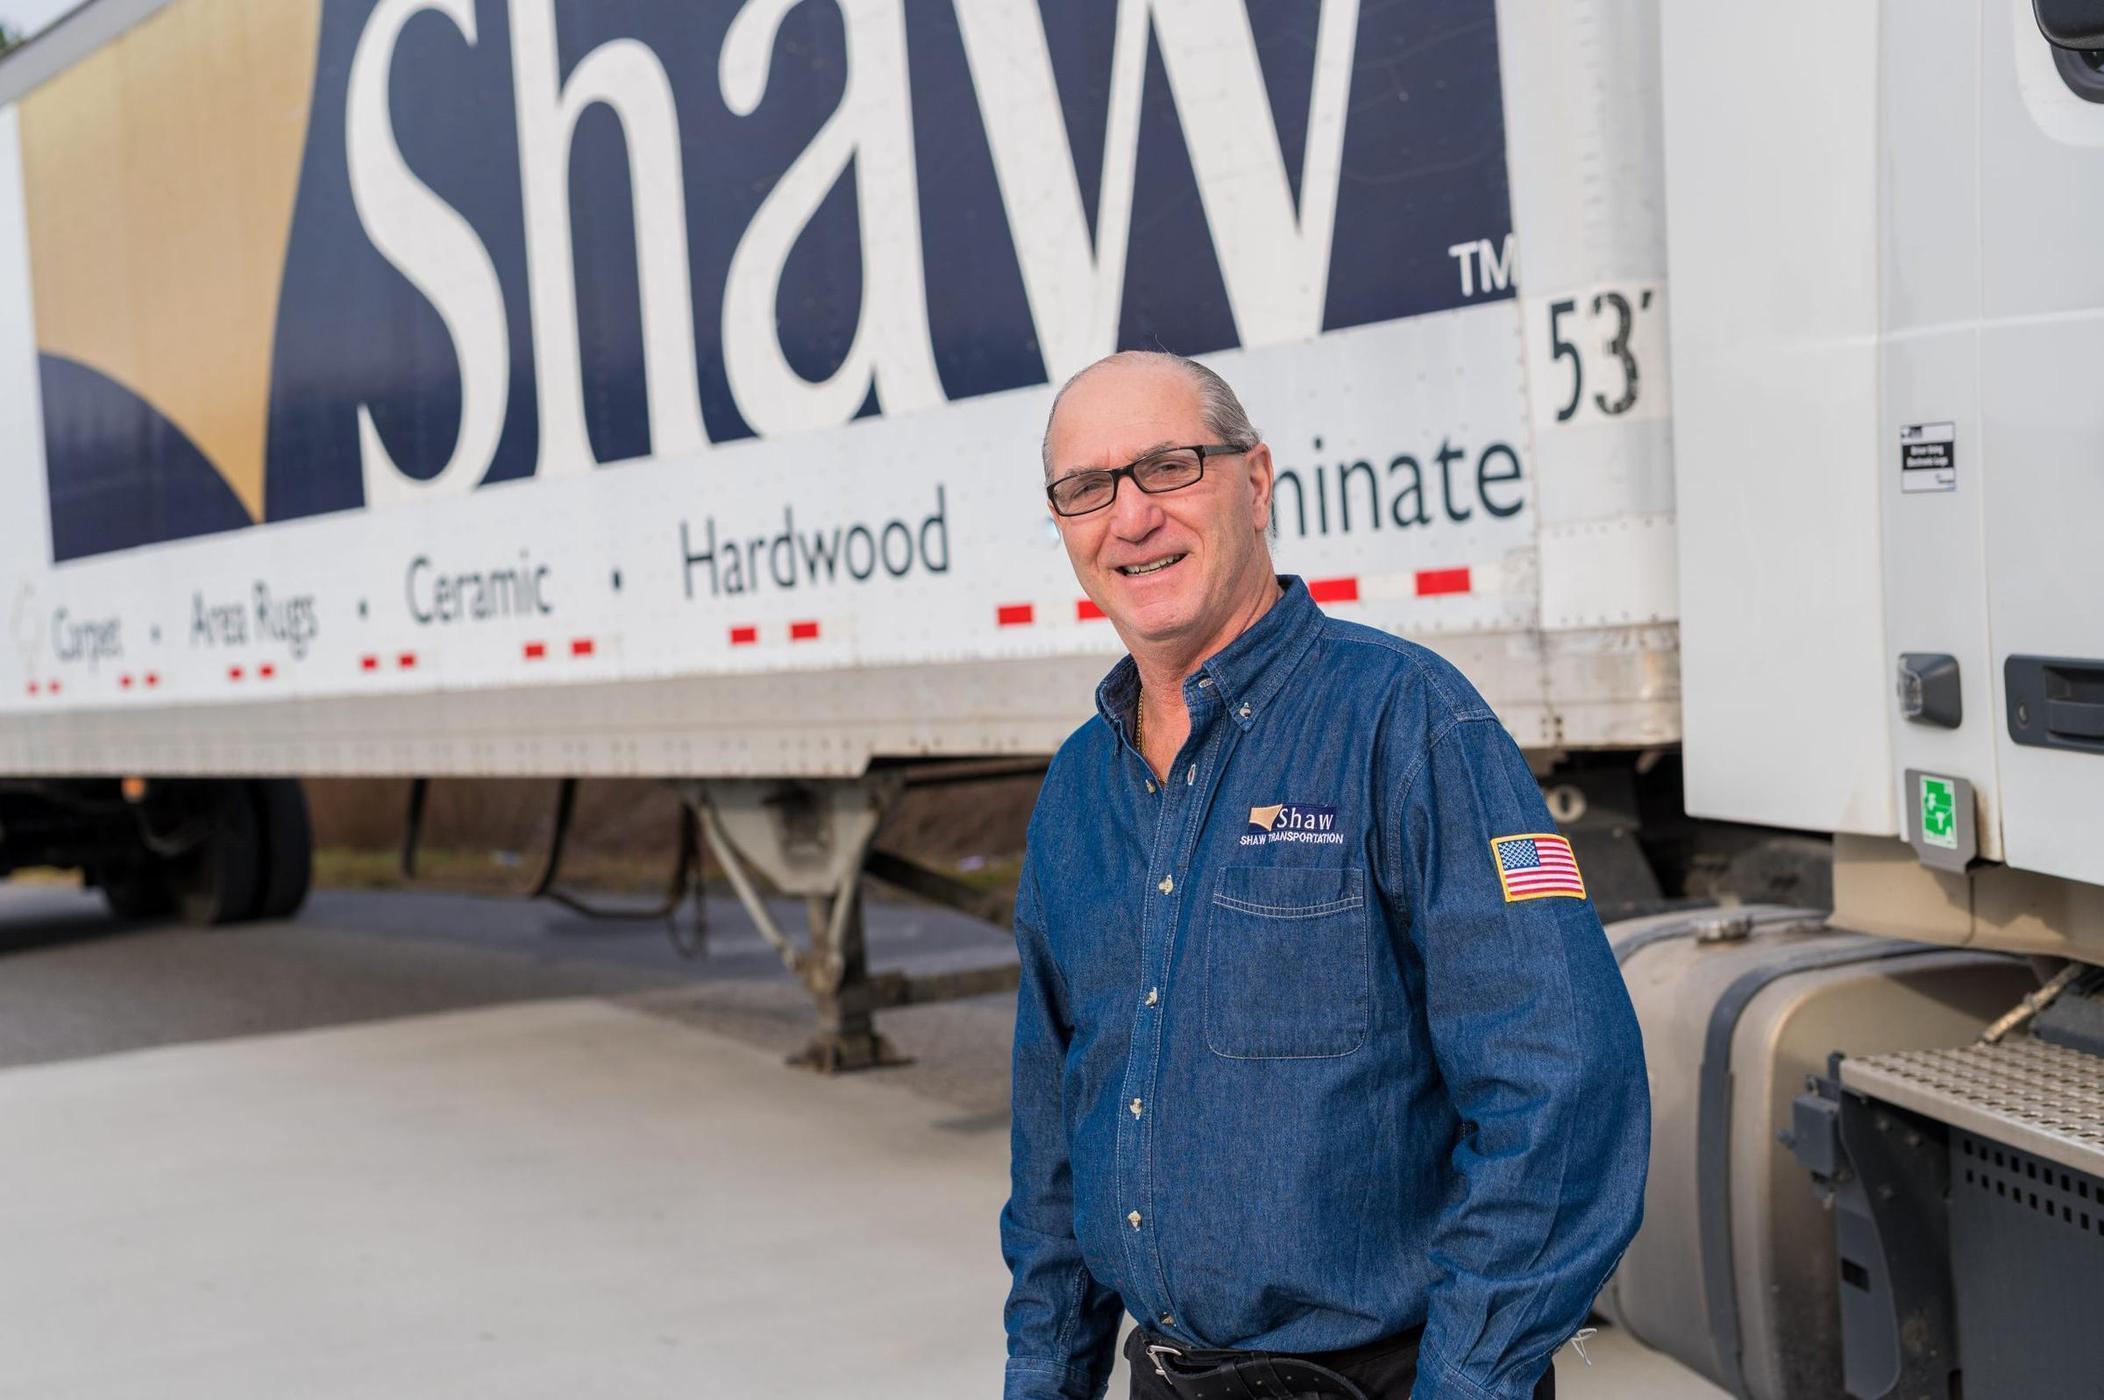 Male truck driver standing on the side of a Shaw semi truck